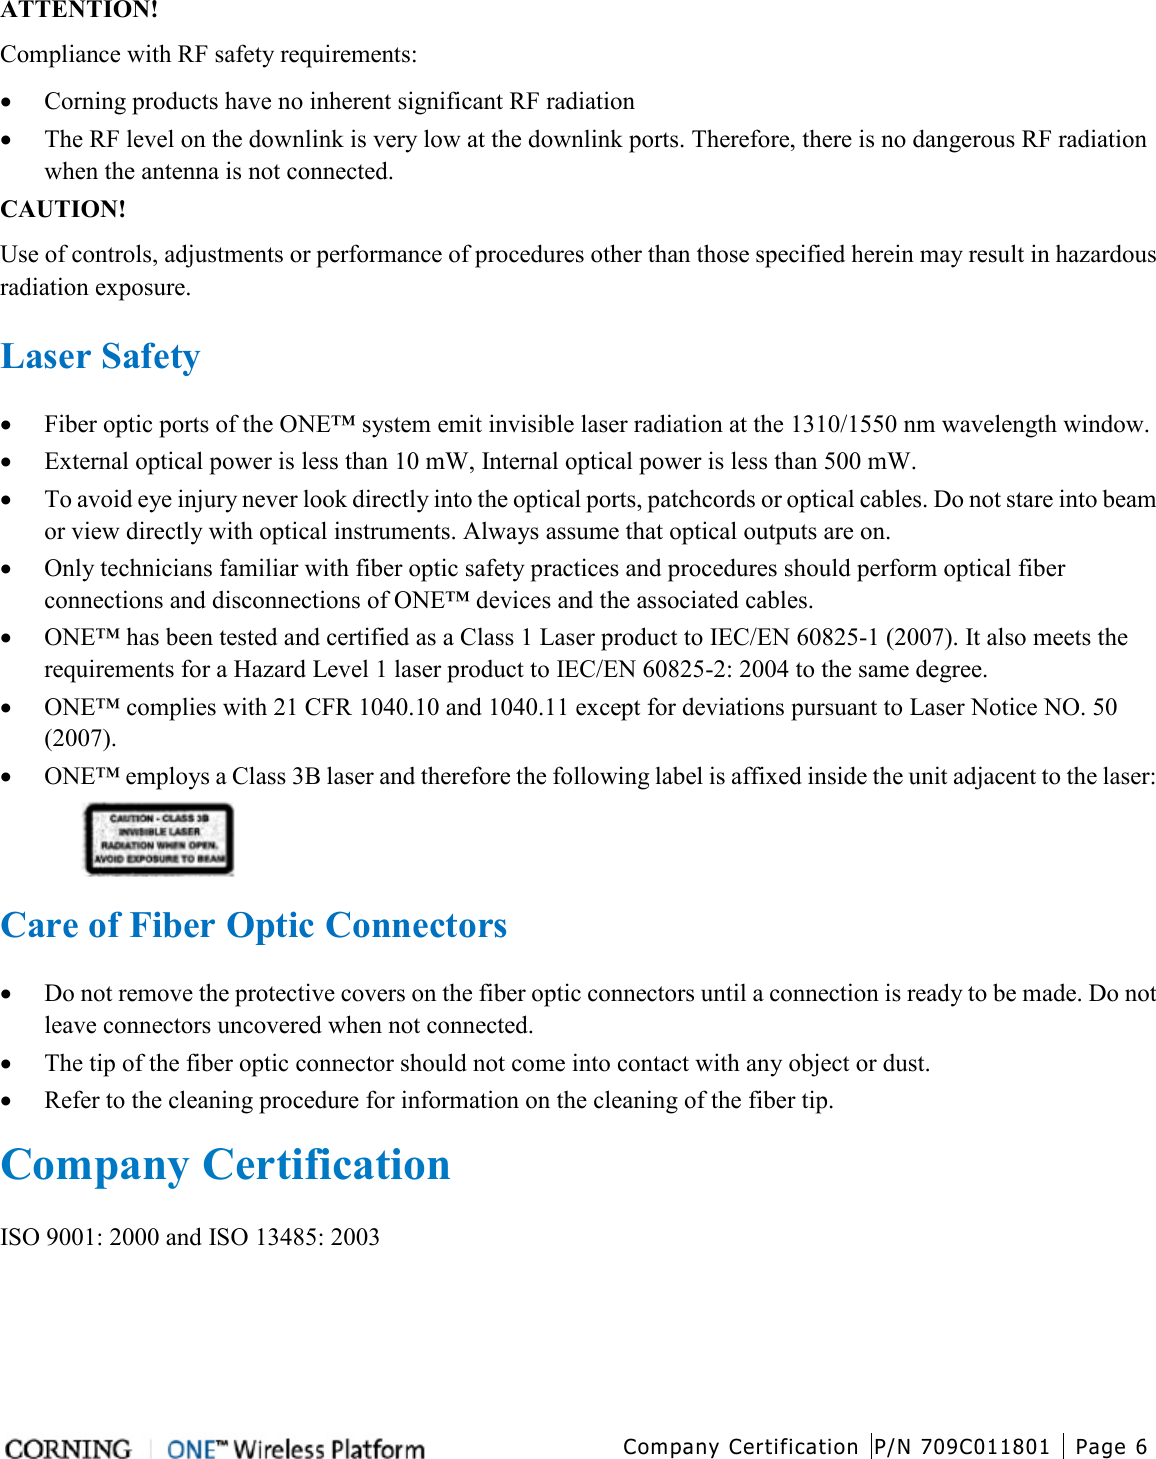  Company Certification P/N 709C011801 Page 6   ATTENTION! Compliance with RF safety requirements: • Corning products have no inherent significant RF radiation • The RF level on the downlink is very low at the downlink ports. Therefore, there is no dangerous RF radiation when the antenna is not connected. CAUTION! Use of controls, adjustments or performance of procedures other than those specified herein may result in hazardous radiation exposure.  Laser Safety • Fiber optic ports of the ONE™ system emit invisible laser radiation at the 1310/1550 nm wavelength window. • External optical power is less than 10 mW, Internal optical power is less than 500 mW. • To avoid eye injury never look directly into the optical ports, patchcords or optical cables. Do not stare into beam or view directly with optical instruments. Always assume that optical outputs are on. • Only technicians familiar with fiber optic safety practices and procedures should perform optical fiber connections and disconnections of ONE™ devices and the associated cables. • ONE™ has been tested and certified as a Class 1 Laser product to IEC/EN 60825-1 (2007). It also meets the requirements for a Hazard Level 1 laser product to IEC/EN 60825-2: 2004 to the same degree. • ONE™ complies with 21 CFR 1040.10 and 1040.11 except for deviations pursuant to Laser Notice NO. 50 (2007).   • ONE™ employs a Class 3B laser and therefore the following label is affixed inside the unit adjacent to the laser:   Care of Fiber Optic Connectors • Do not remove the protective covers on the fiber optic connectors until a connection is ready to be made. Do not leave connectors uncovered when not connected. • The tip of the fiber optic connector should not come into contact with any object or dust. • Refer to the cleaning procedure for information on the cleaning of the fiber tip.  Company Certification ISO 9001: 2000 and ISO 13485: 2003    